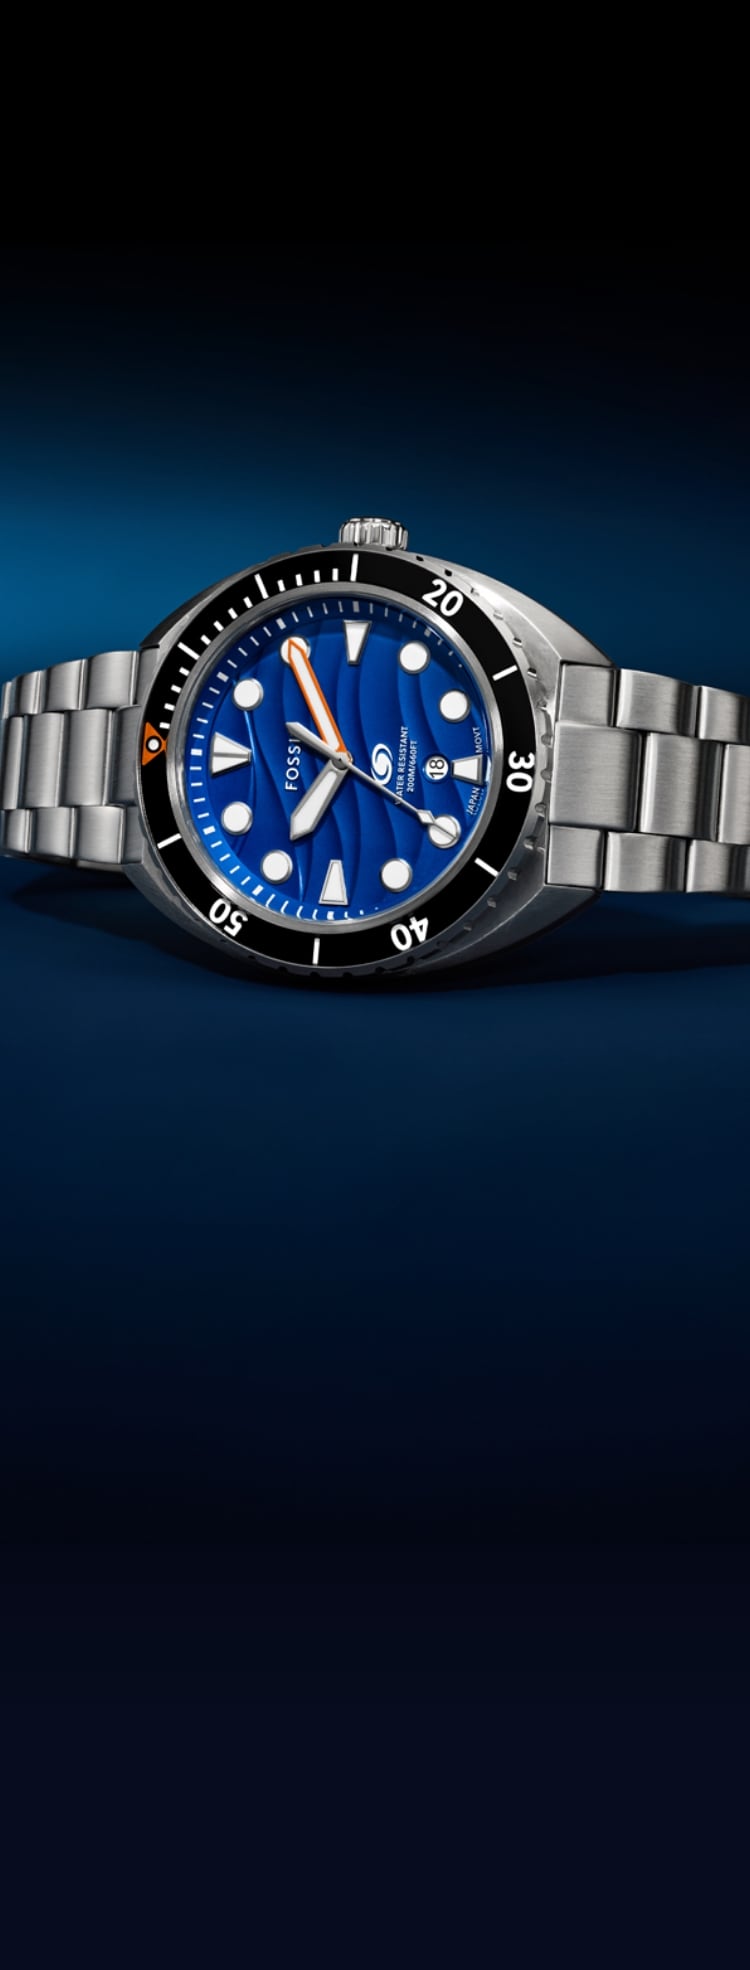 The stainless steel Breaker Dive watch with a blue dial surrounded by bubbles of water.